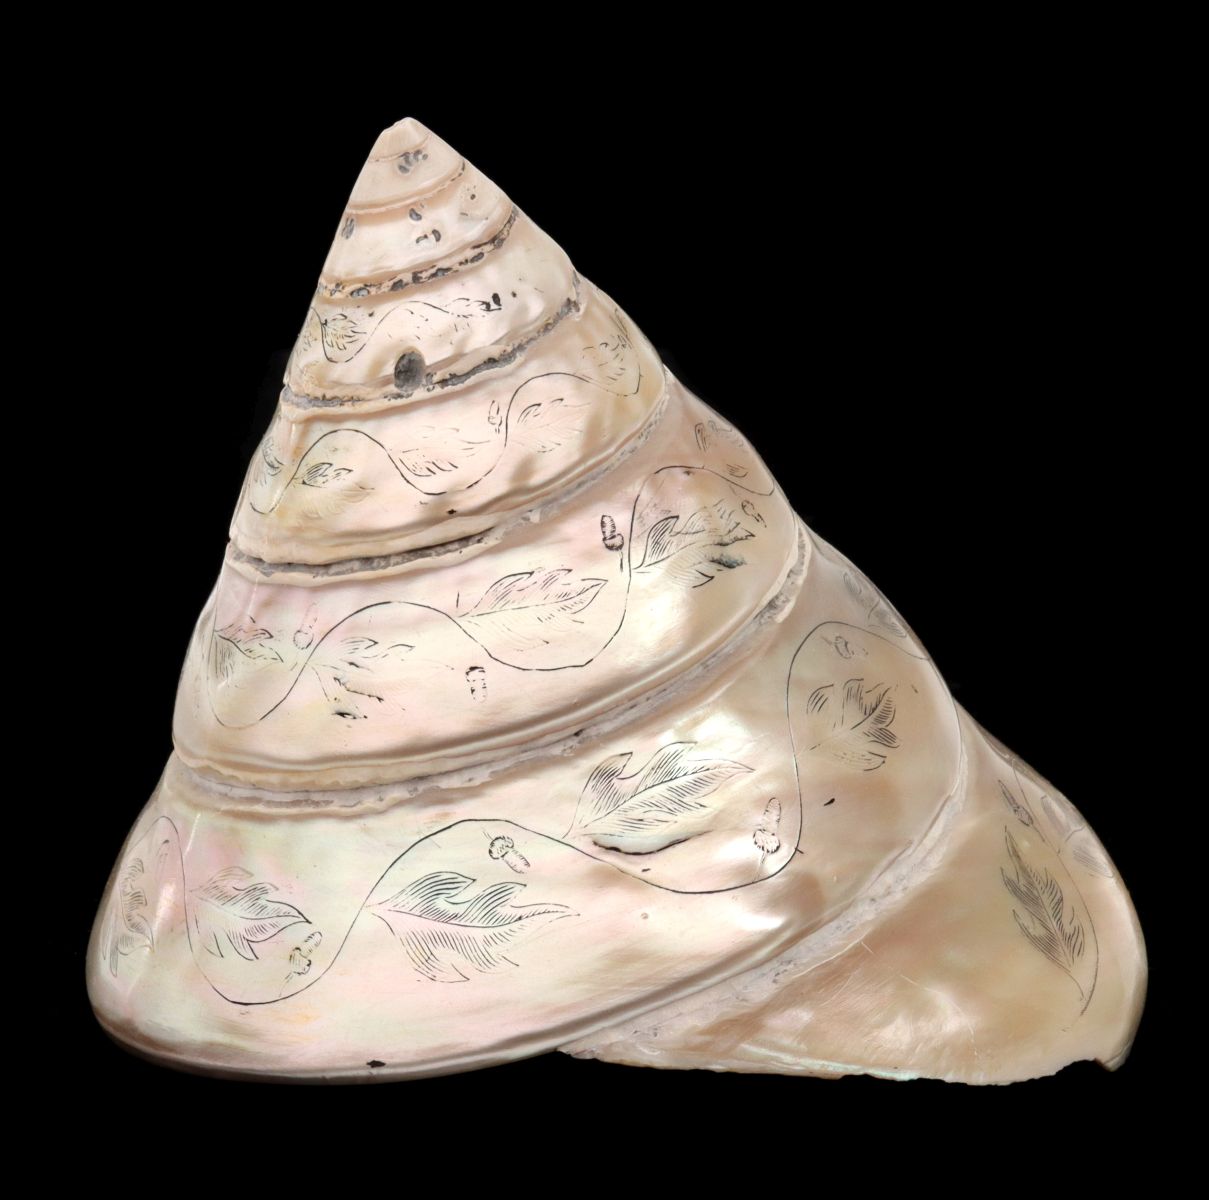 A PEARLESCENT CONCH-TYPE SHELL WITH ETCHED VERSE